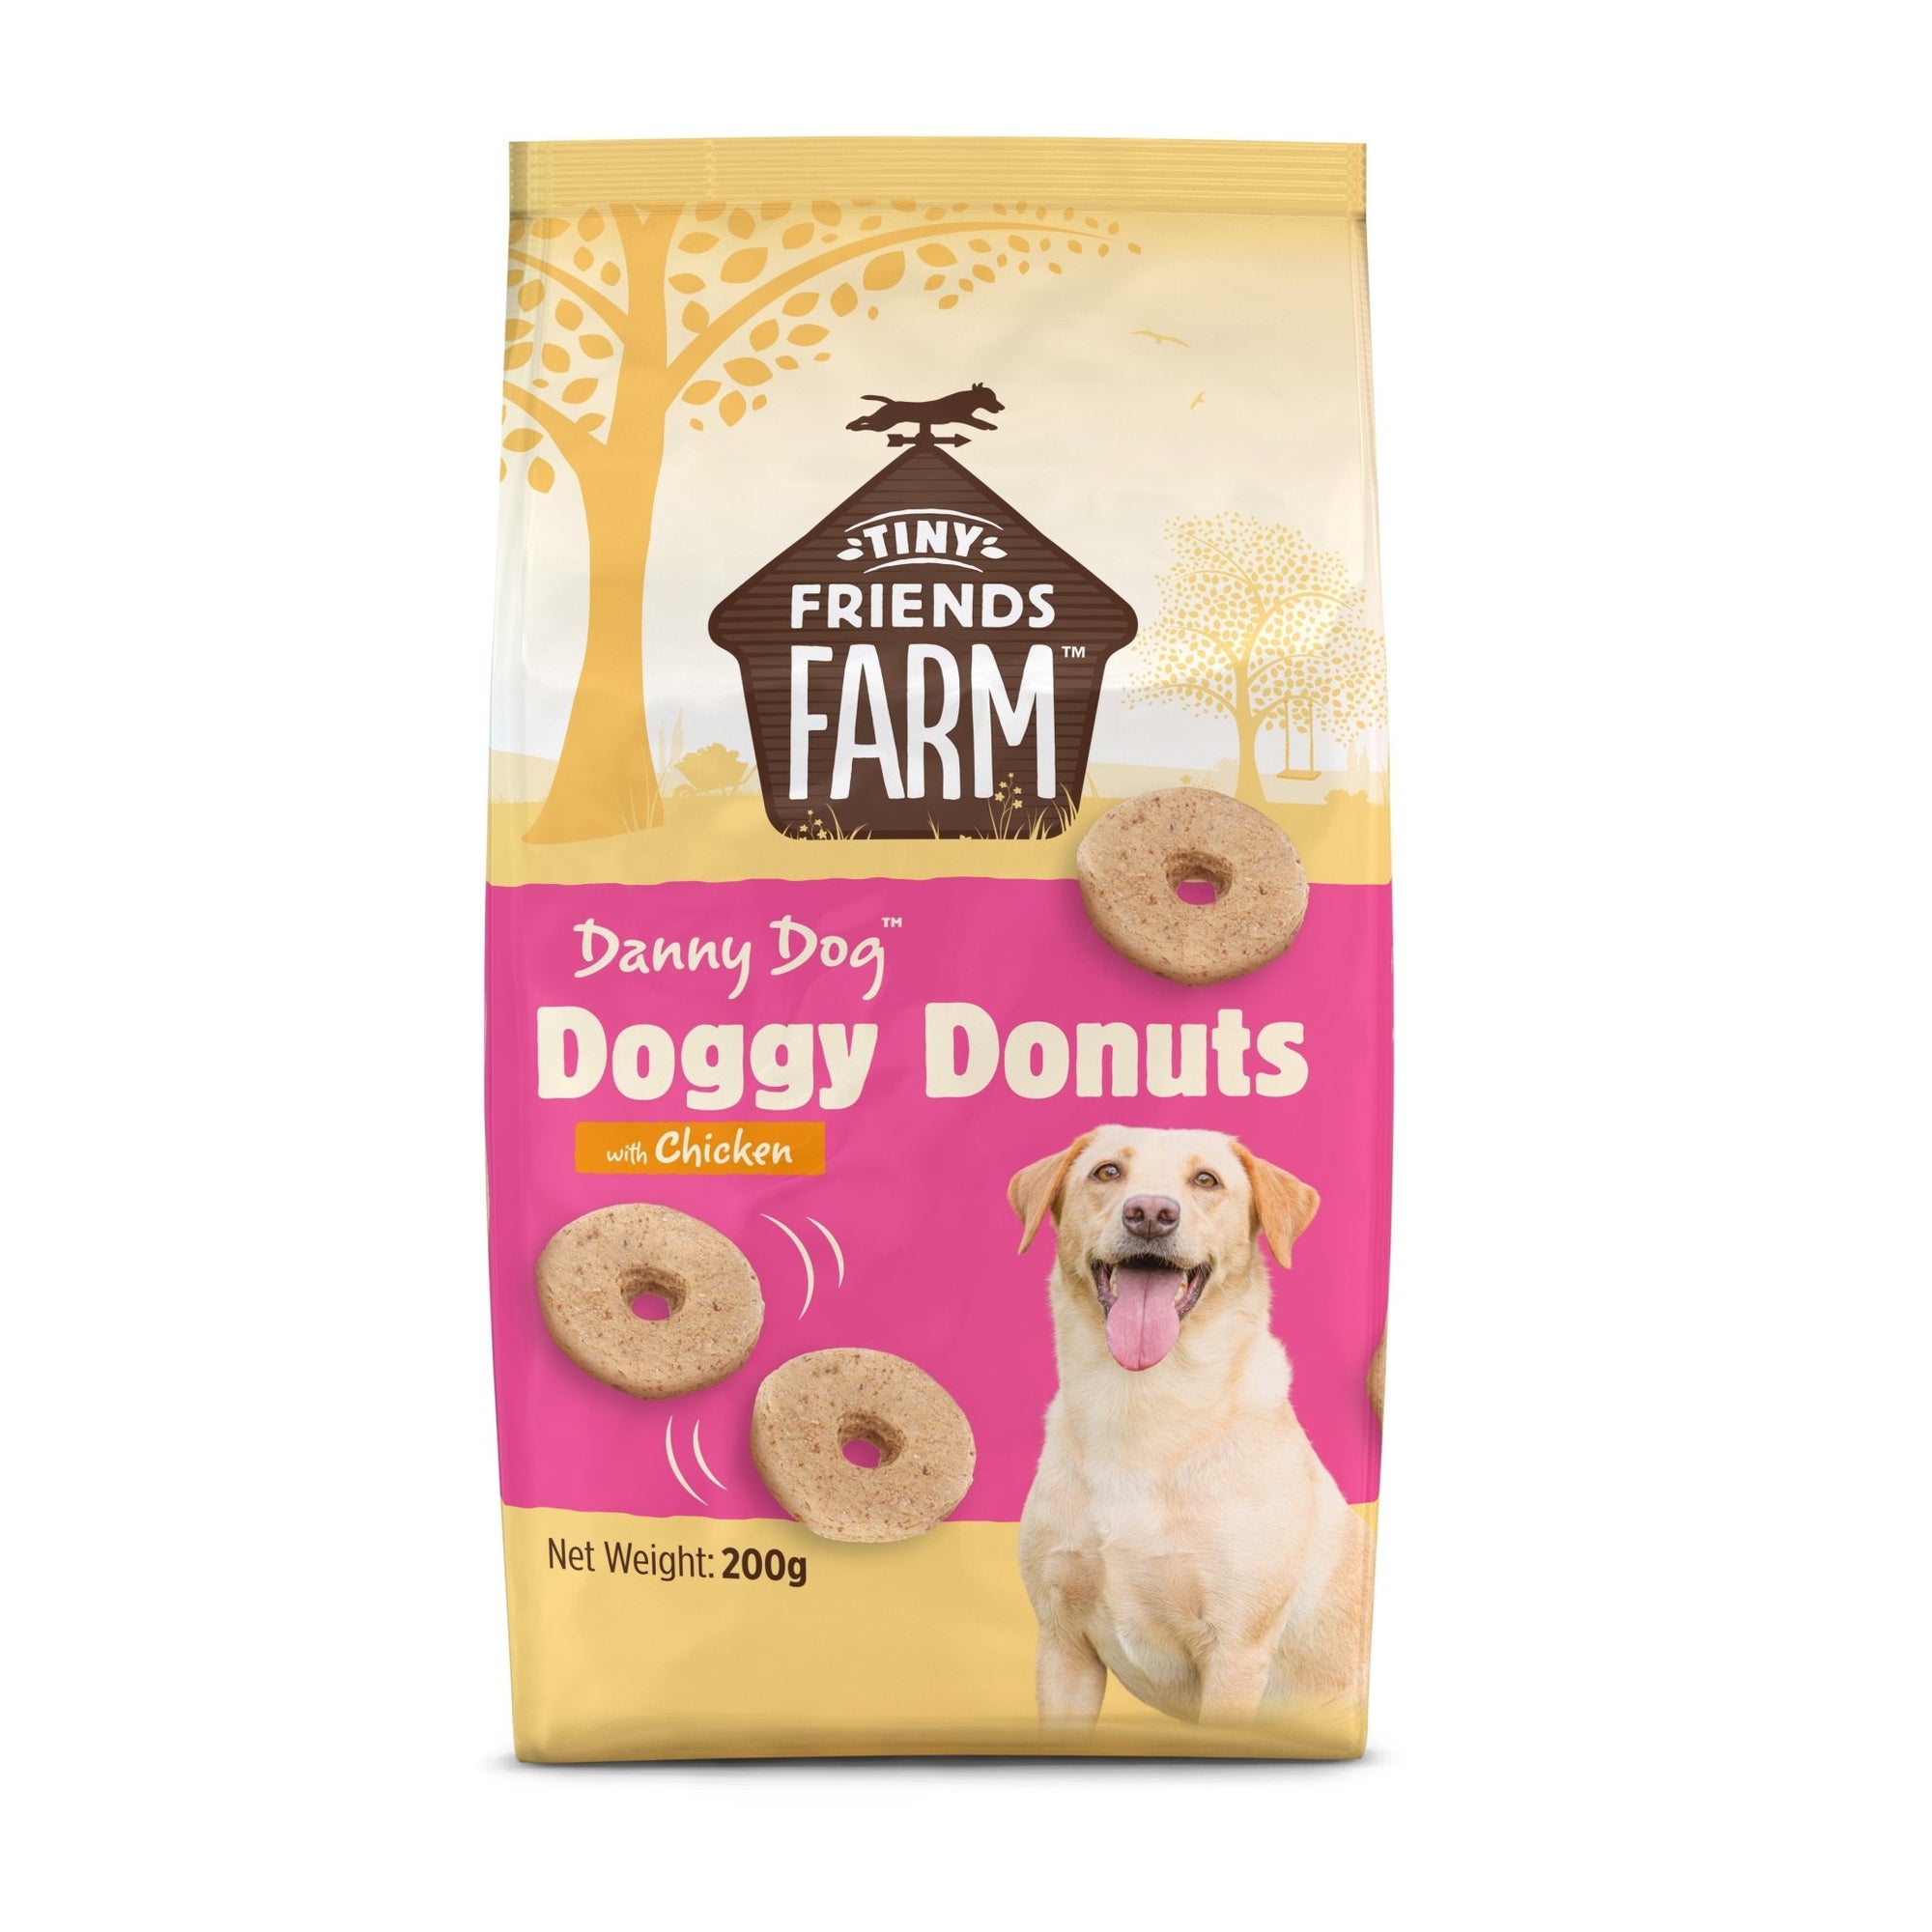 Tiny Friends Farm Danny Dog Doggy Donuts with Chicken Dog Treats 6x200g, Supreme Pet Foods,